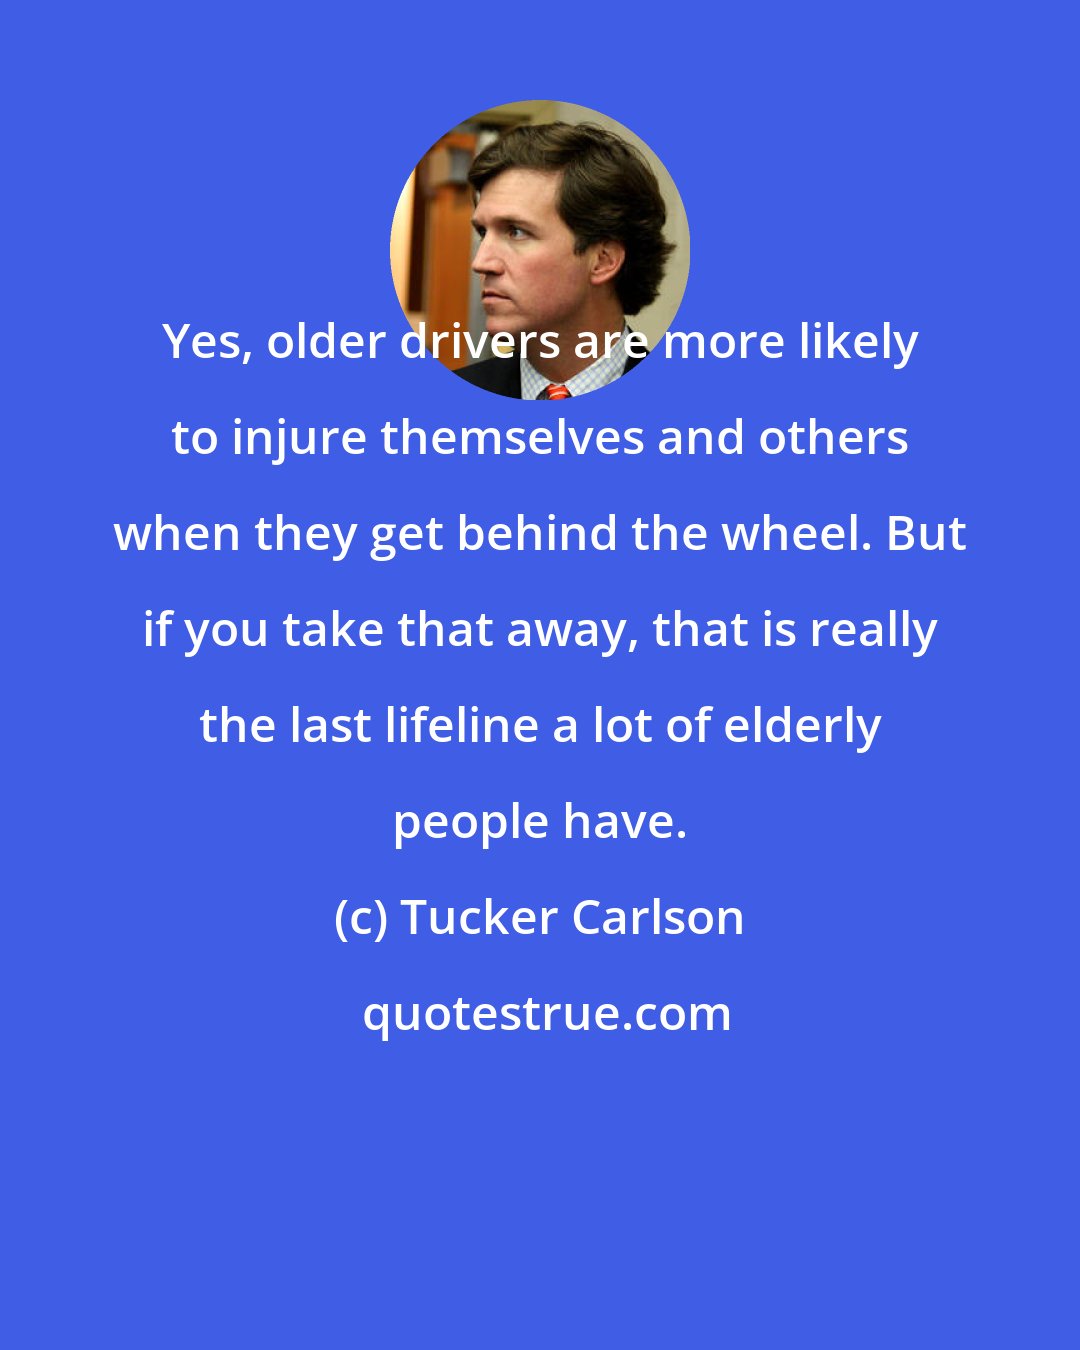 Tucker Carlson: Yes, older drivers are more likely to injure themselves and others when they get behind the wheel. But if you take that away, that is really the last lifeline a lot of elderly people have.